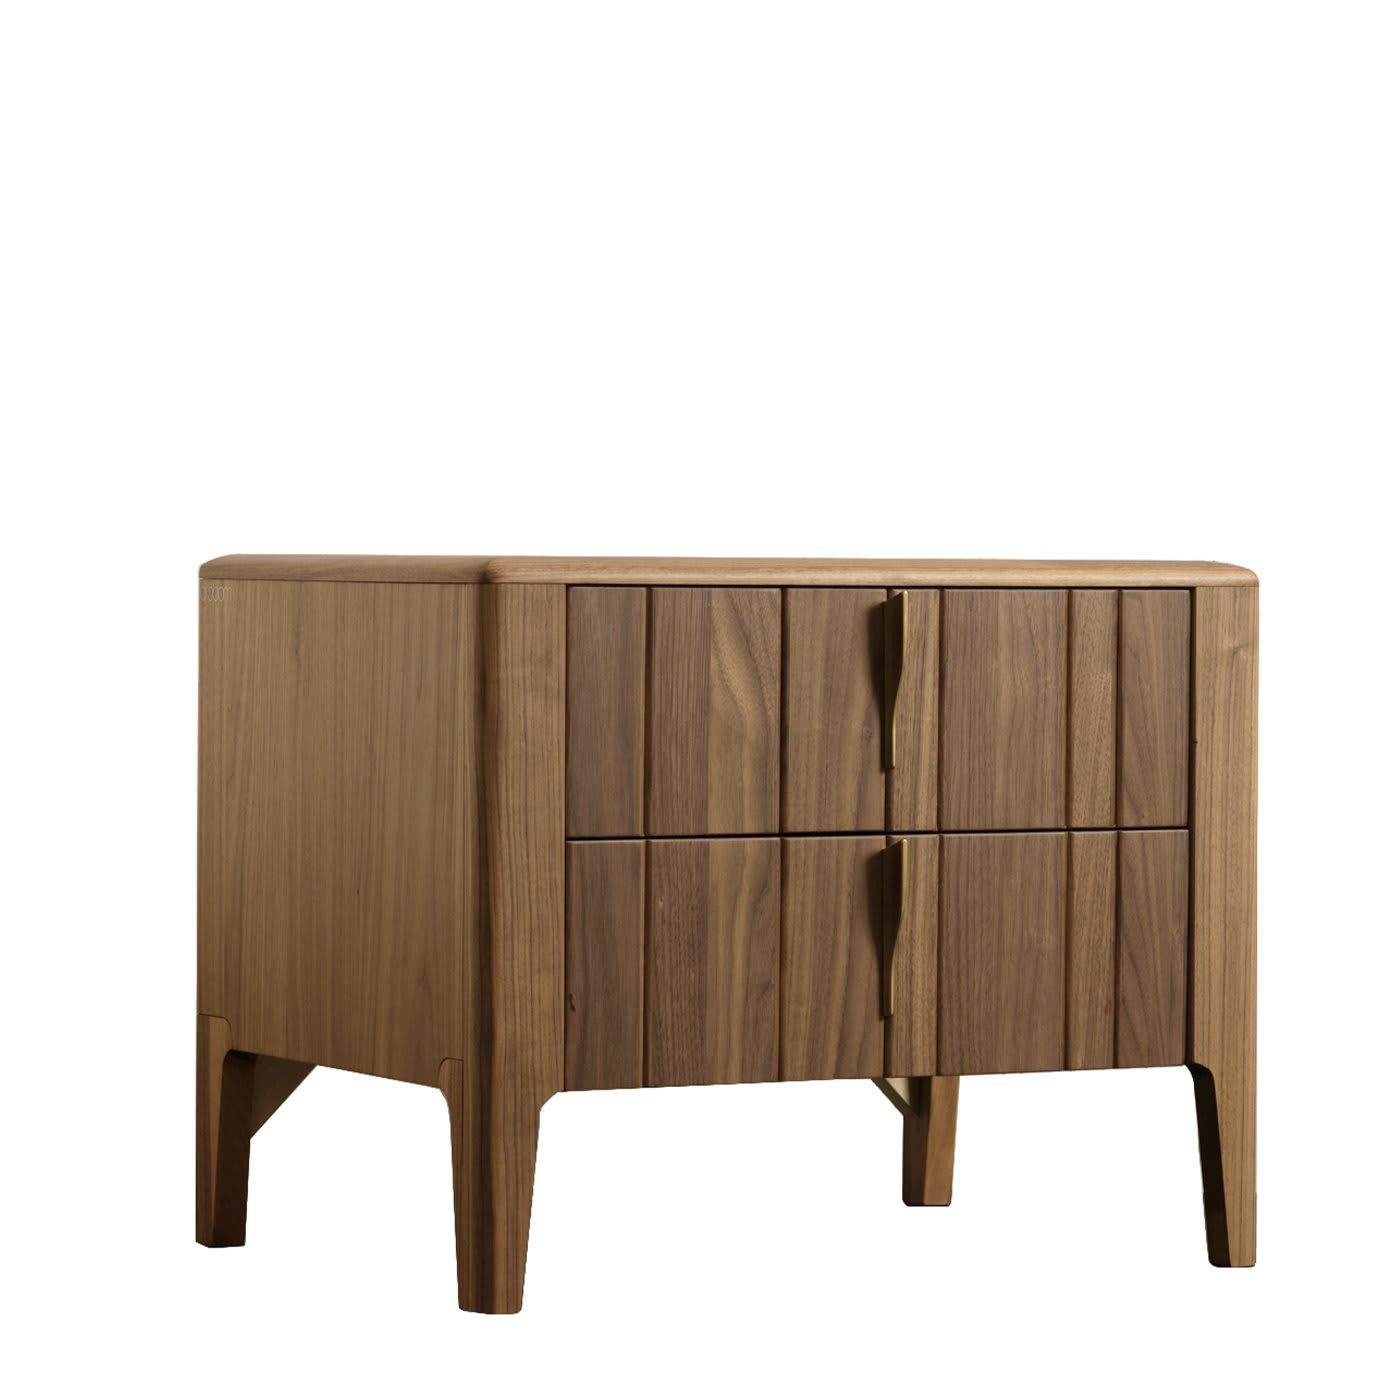 Featuring vertically striped slats of smooth Canaletto walnut, the Domino Nightstand is a celebration of natural wood. Featuring Modo10's Havana finish, the wood's veins shine through, becoming the defining feature of the whole piece. With two